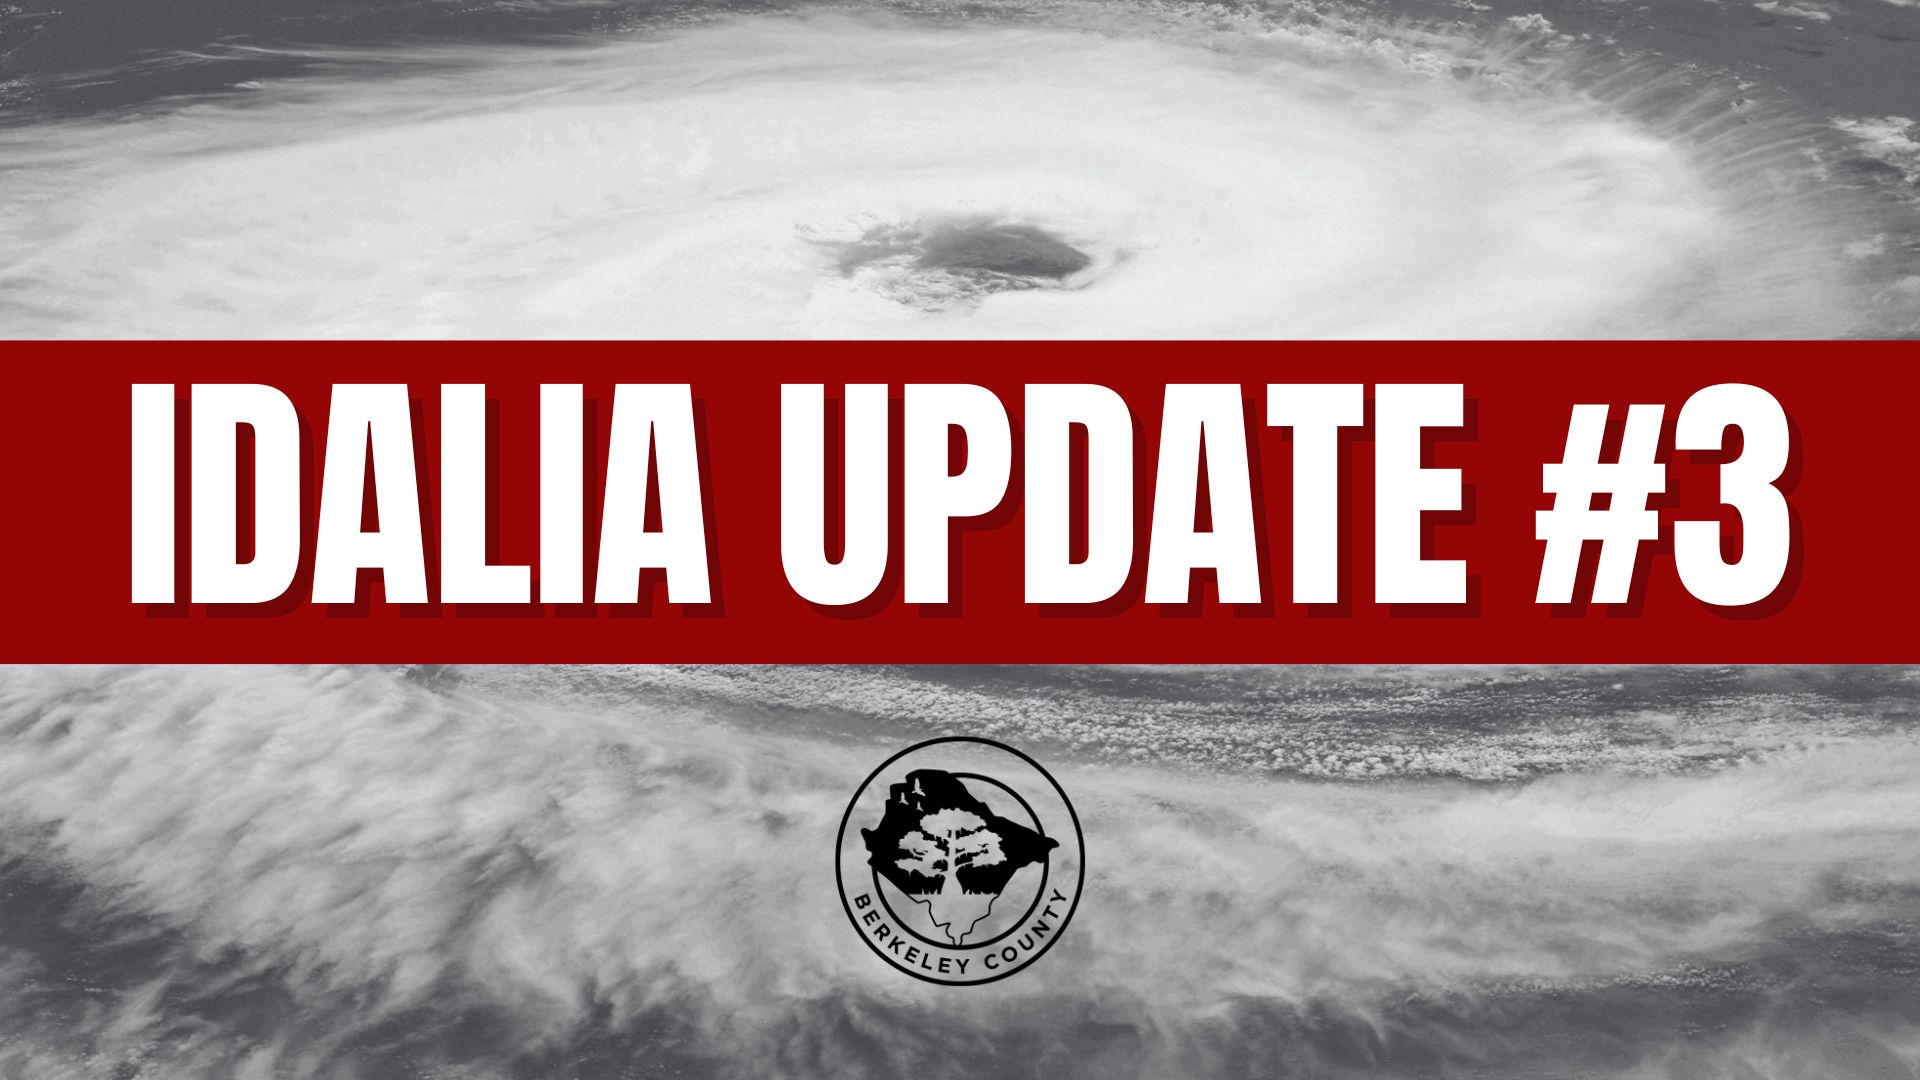 Berkeley County Prepares for Impacts from Idalia, Update #3